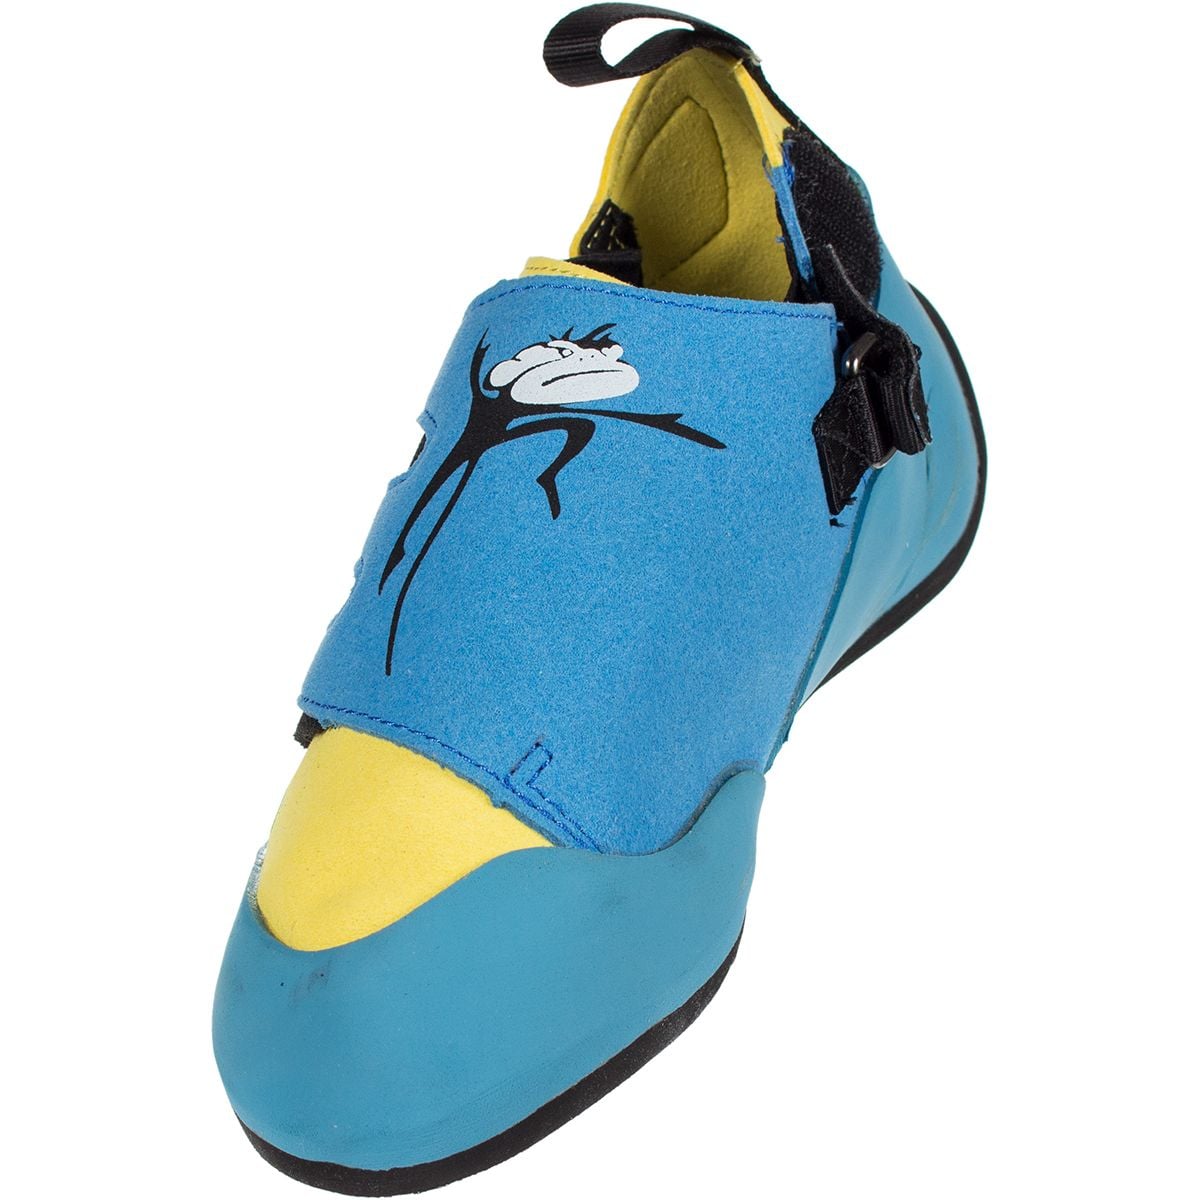 mad rock kids climbing shoes